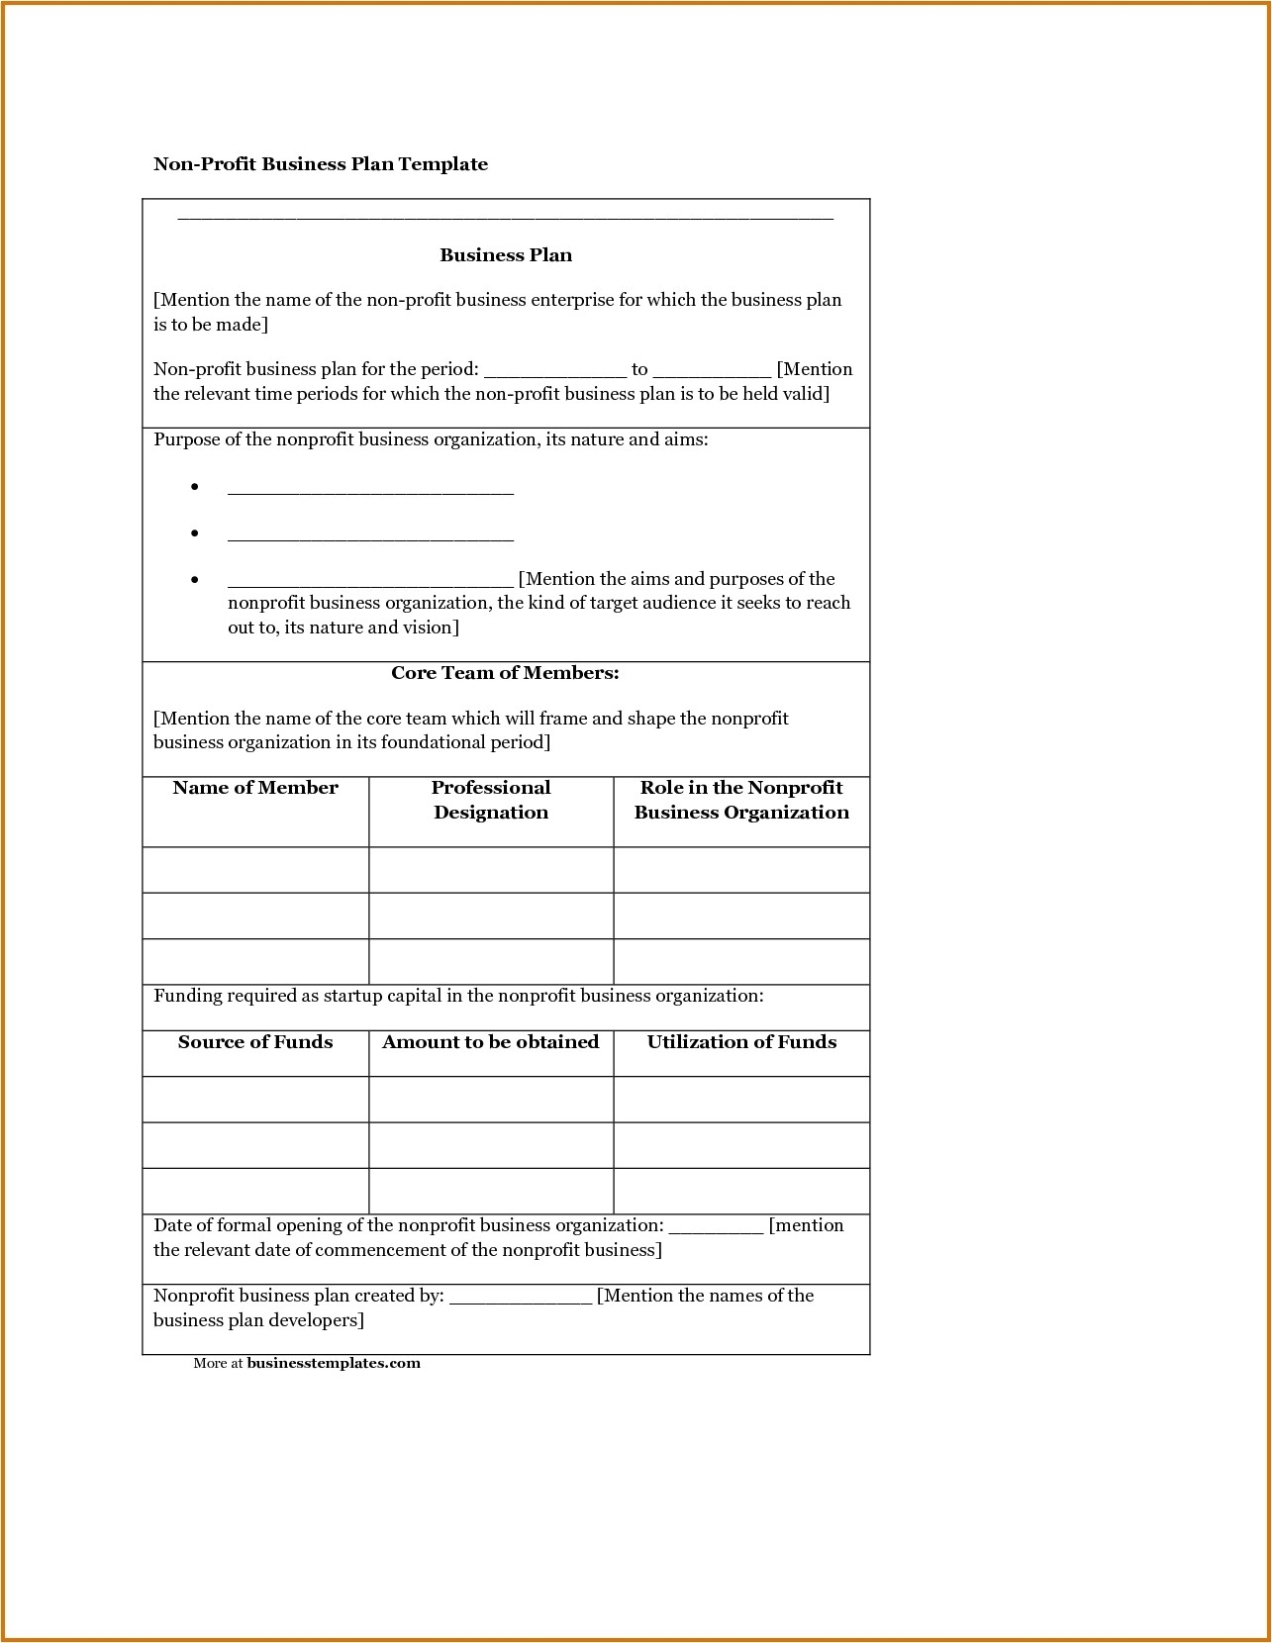 Not For Profit Business Plan Template | Williamson-Ga inside Non Profit Business Plan Template Free Download